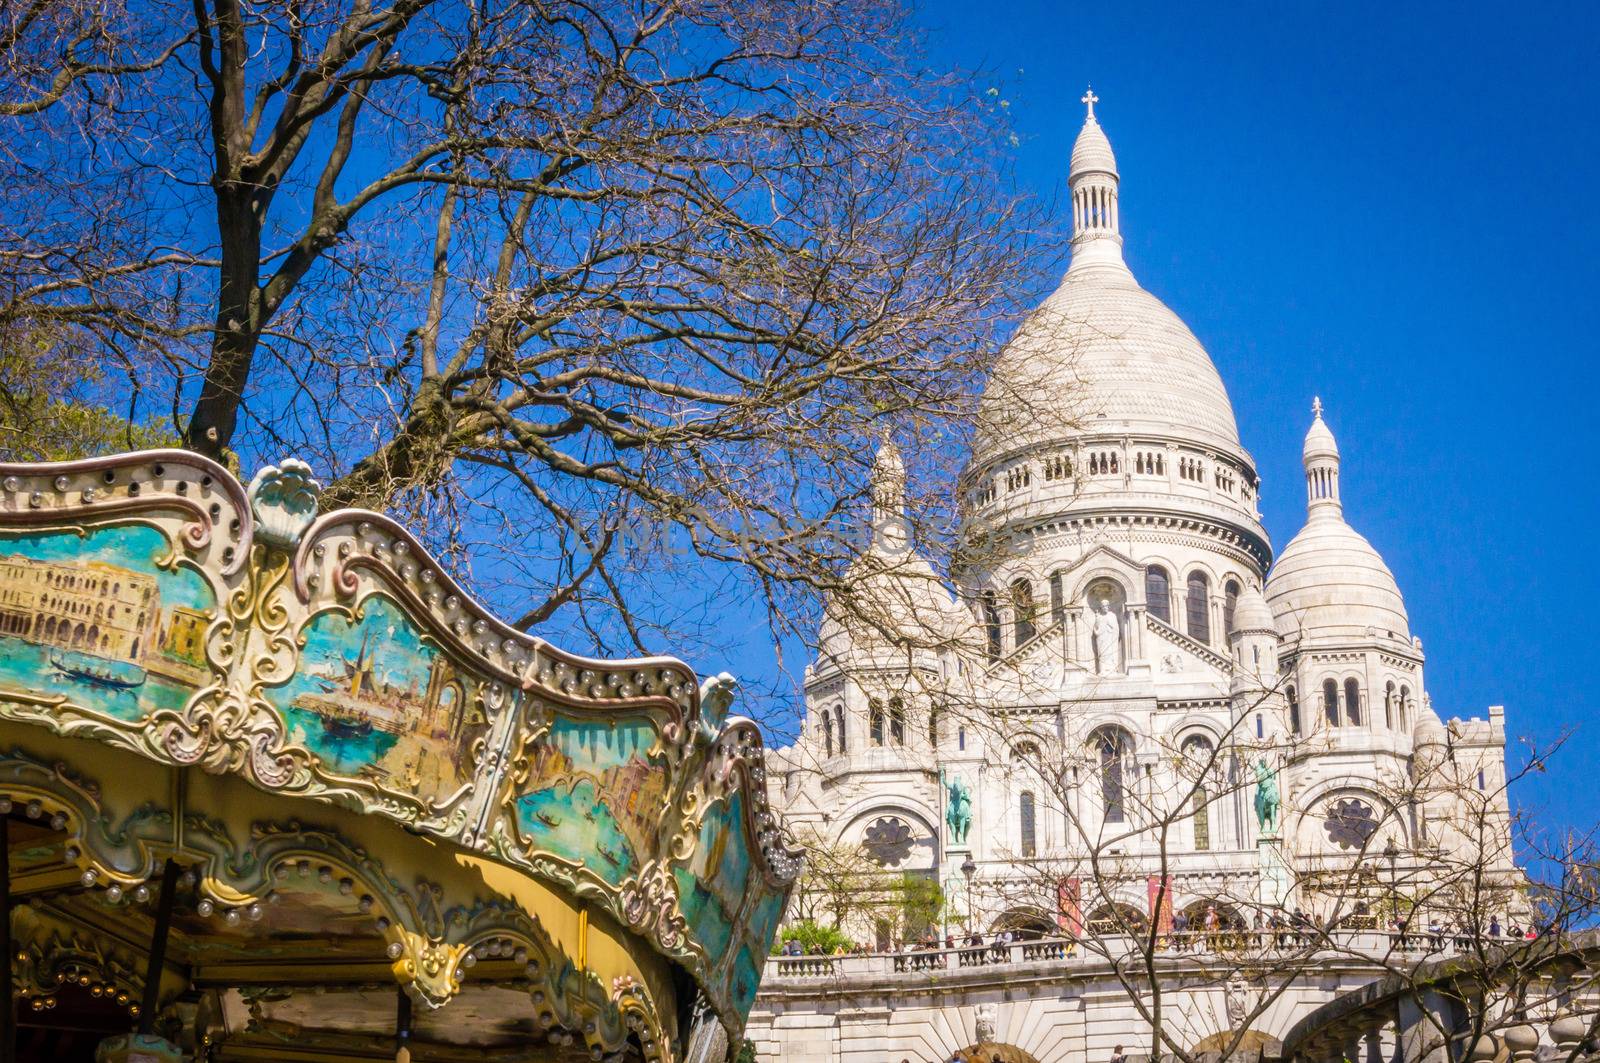 Sacre coeur and merry-go-round in Montmartre by bignoub